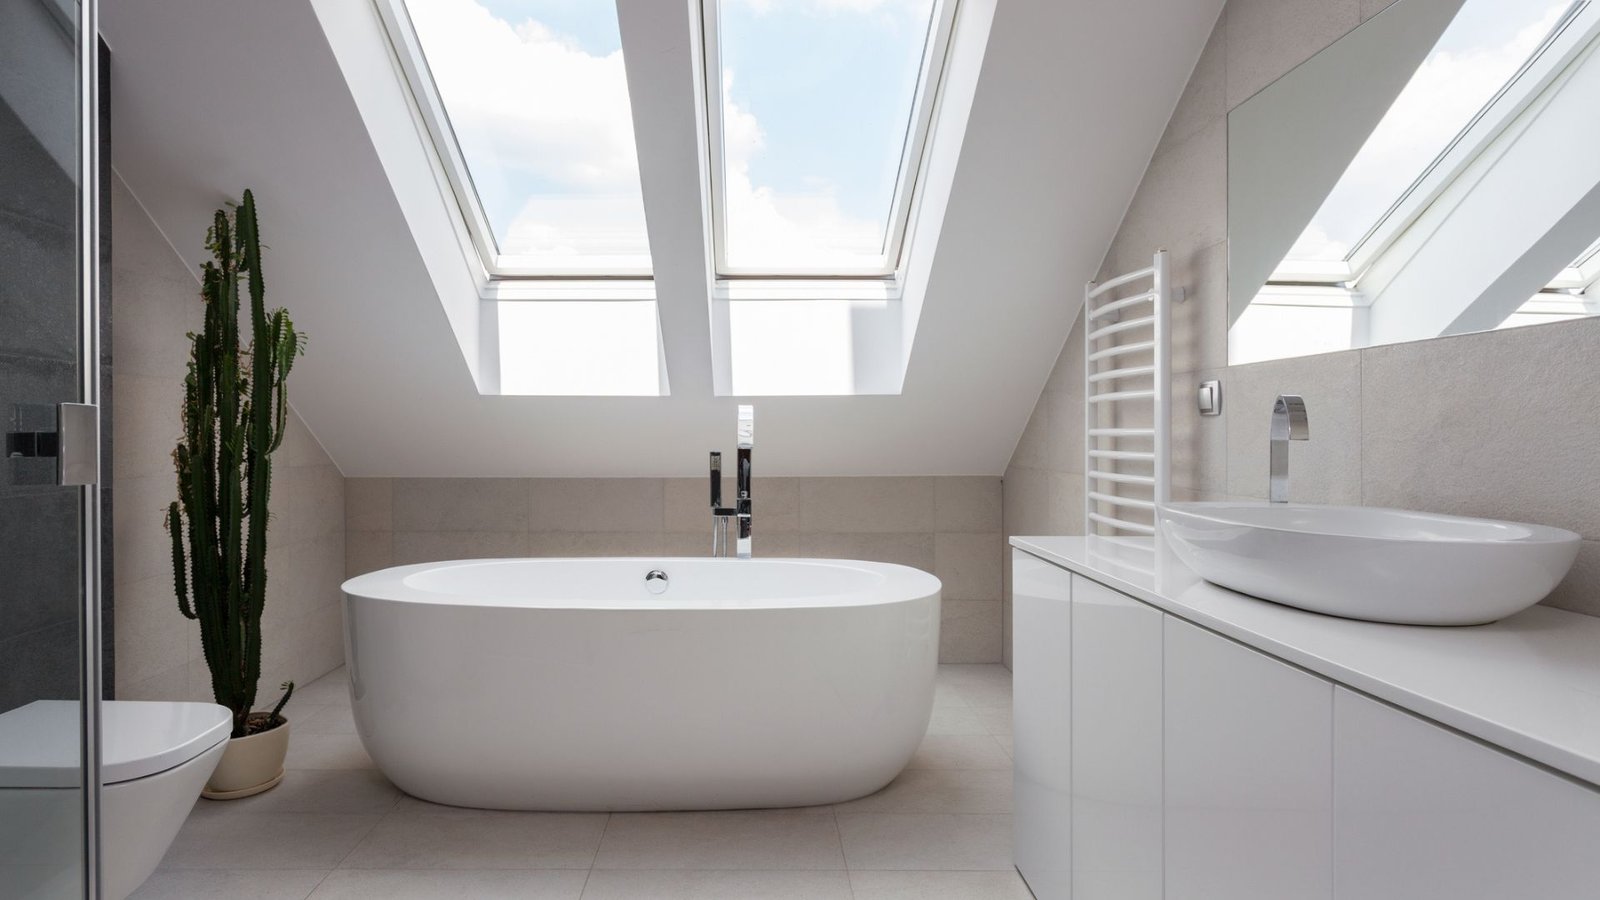 this image shows Skylight Ceiling for a Stunning Impact